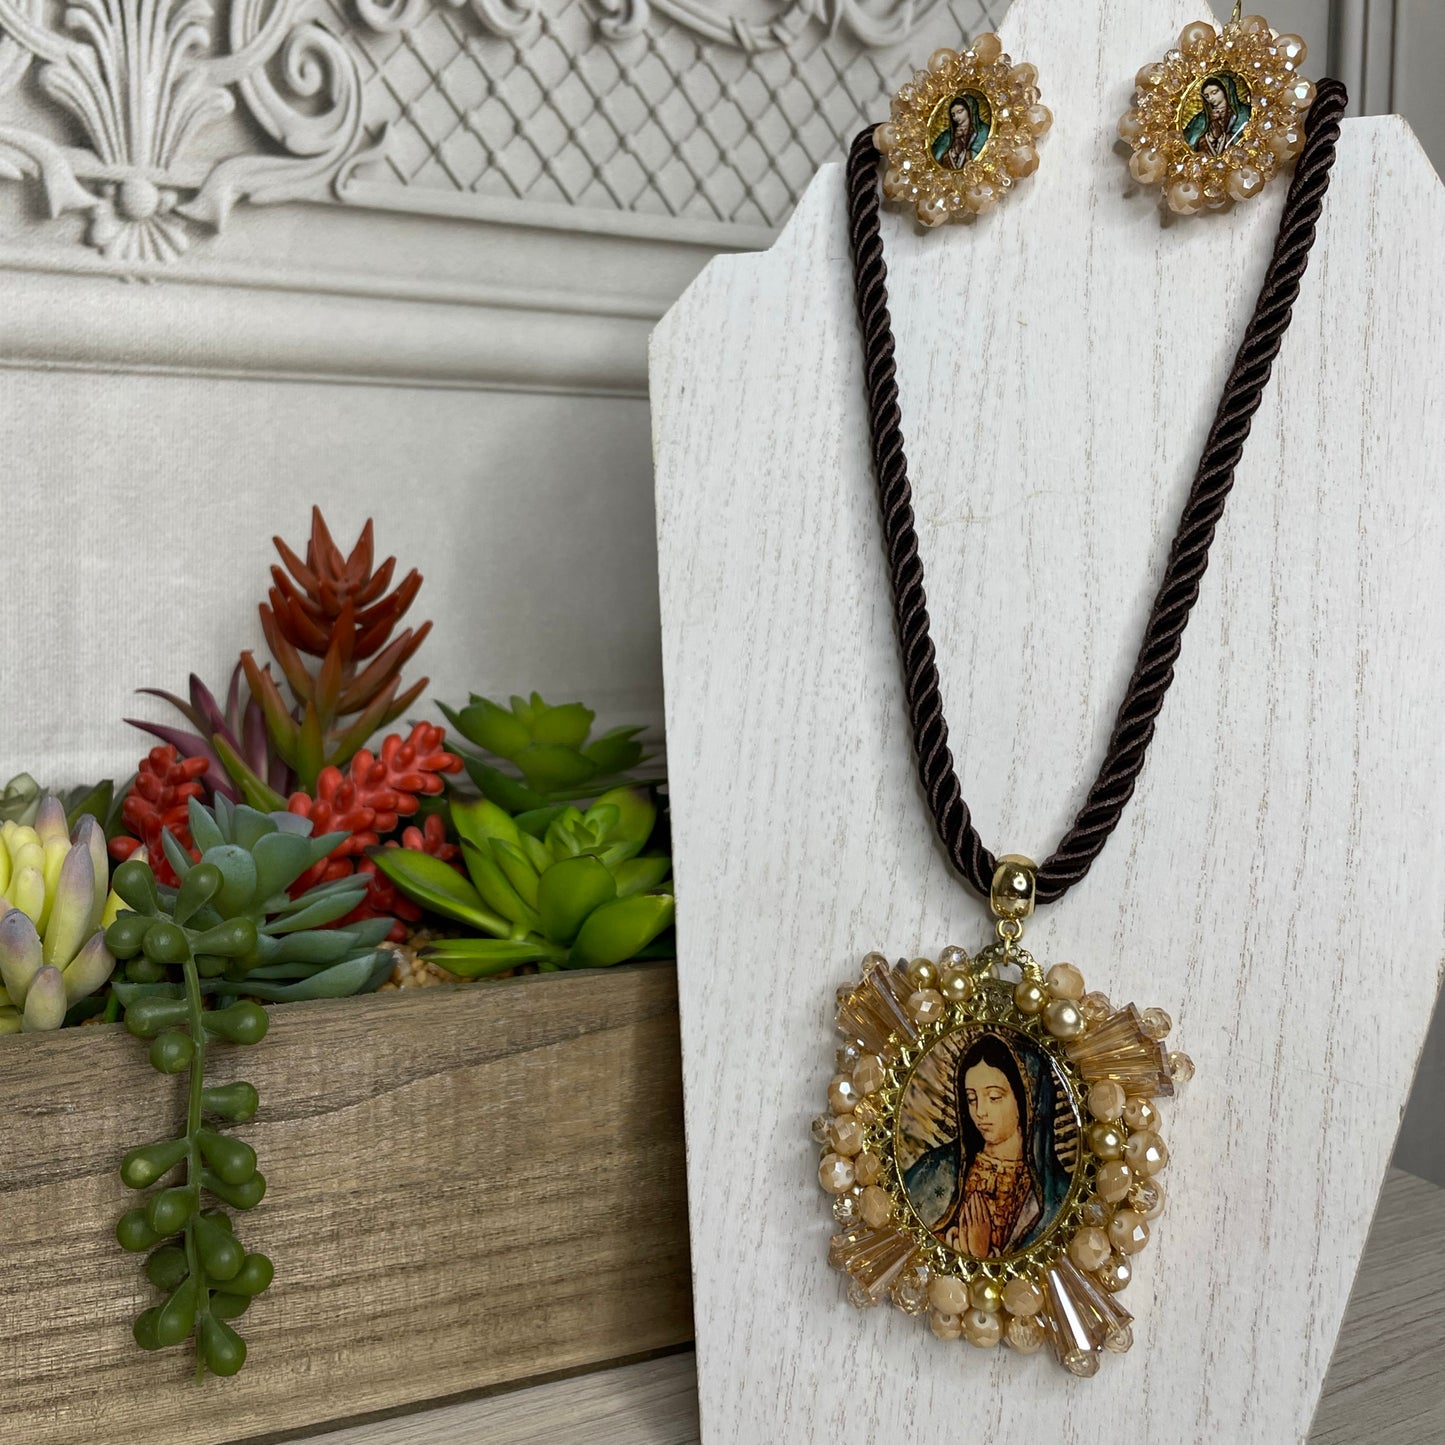 Our Lady of Guadalupe Necklace Set - Large